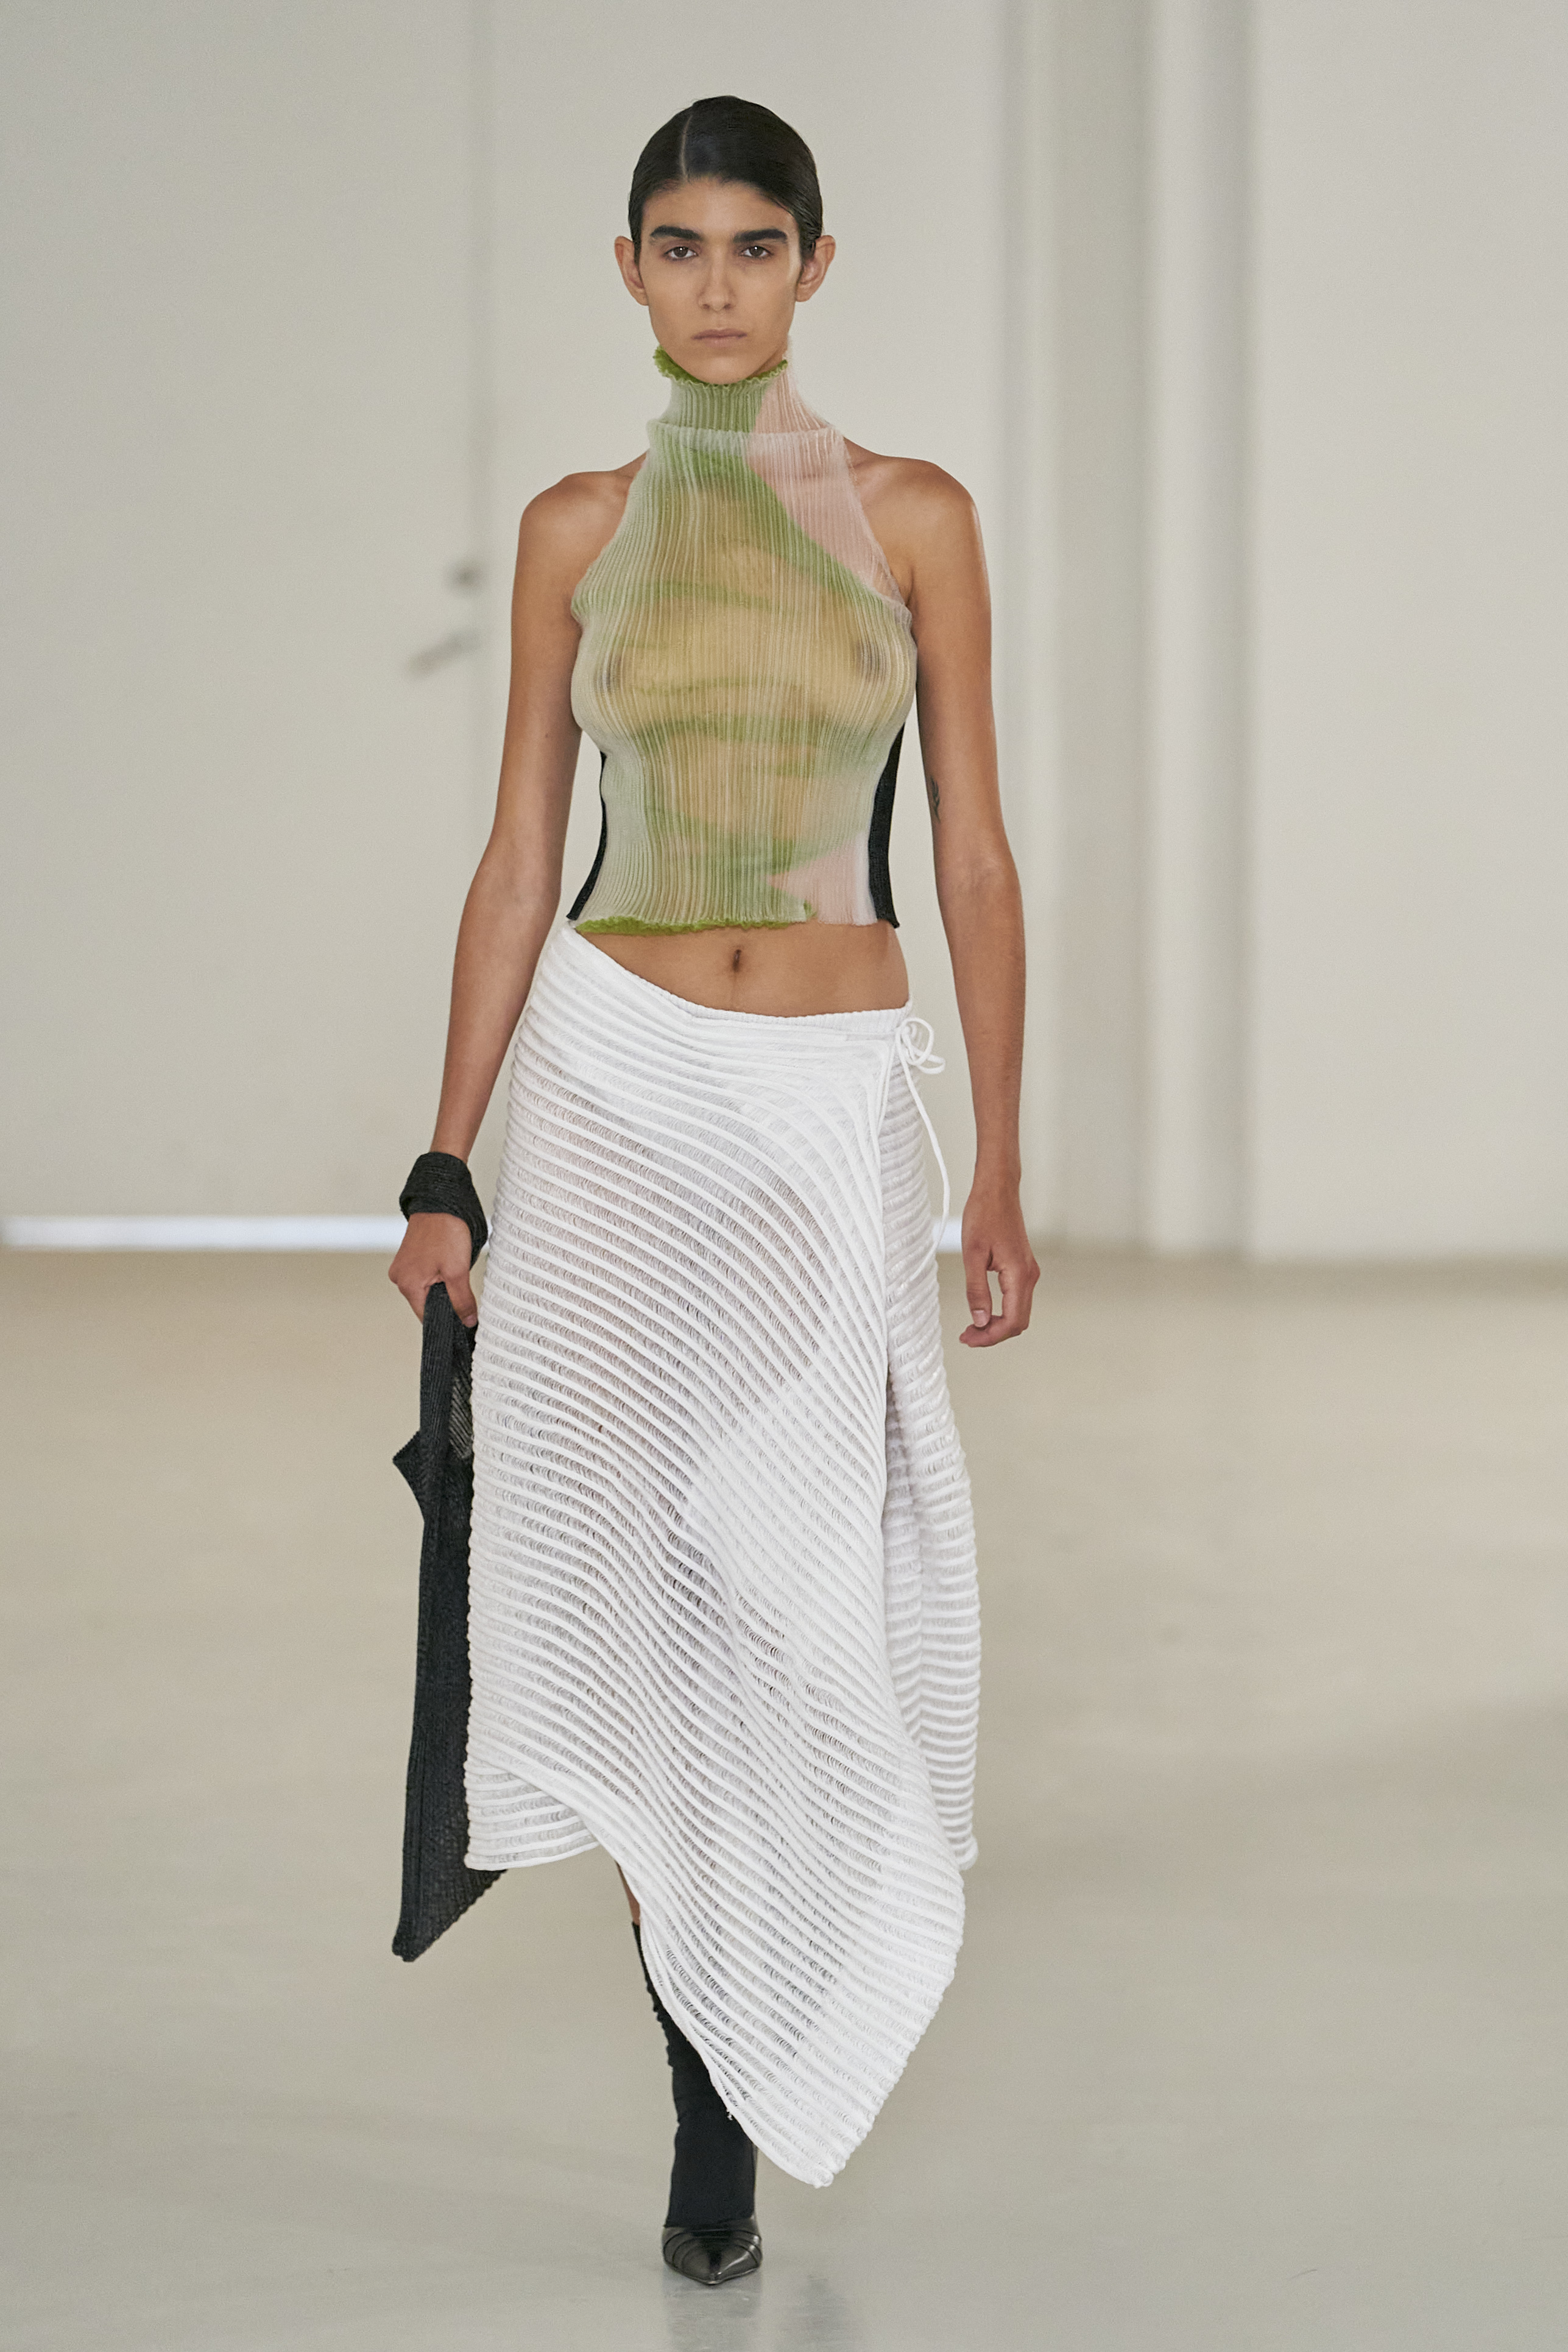 A model walking A. Roege Hove SS23